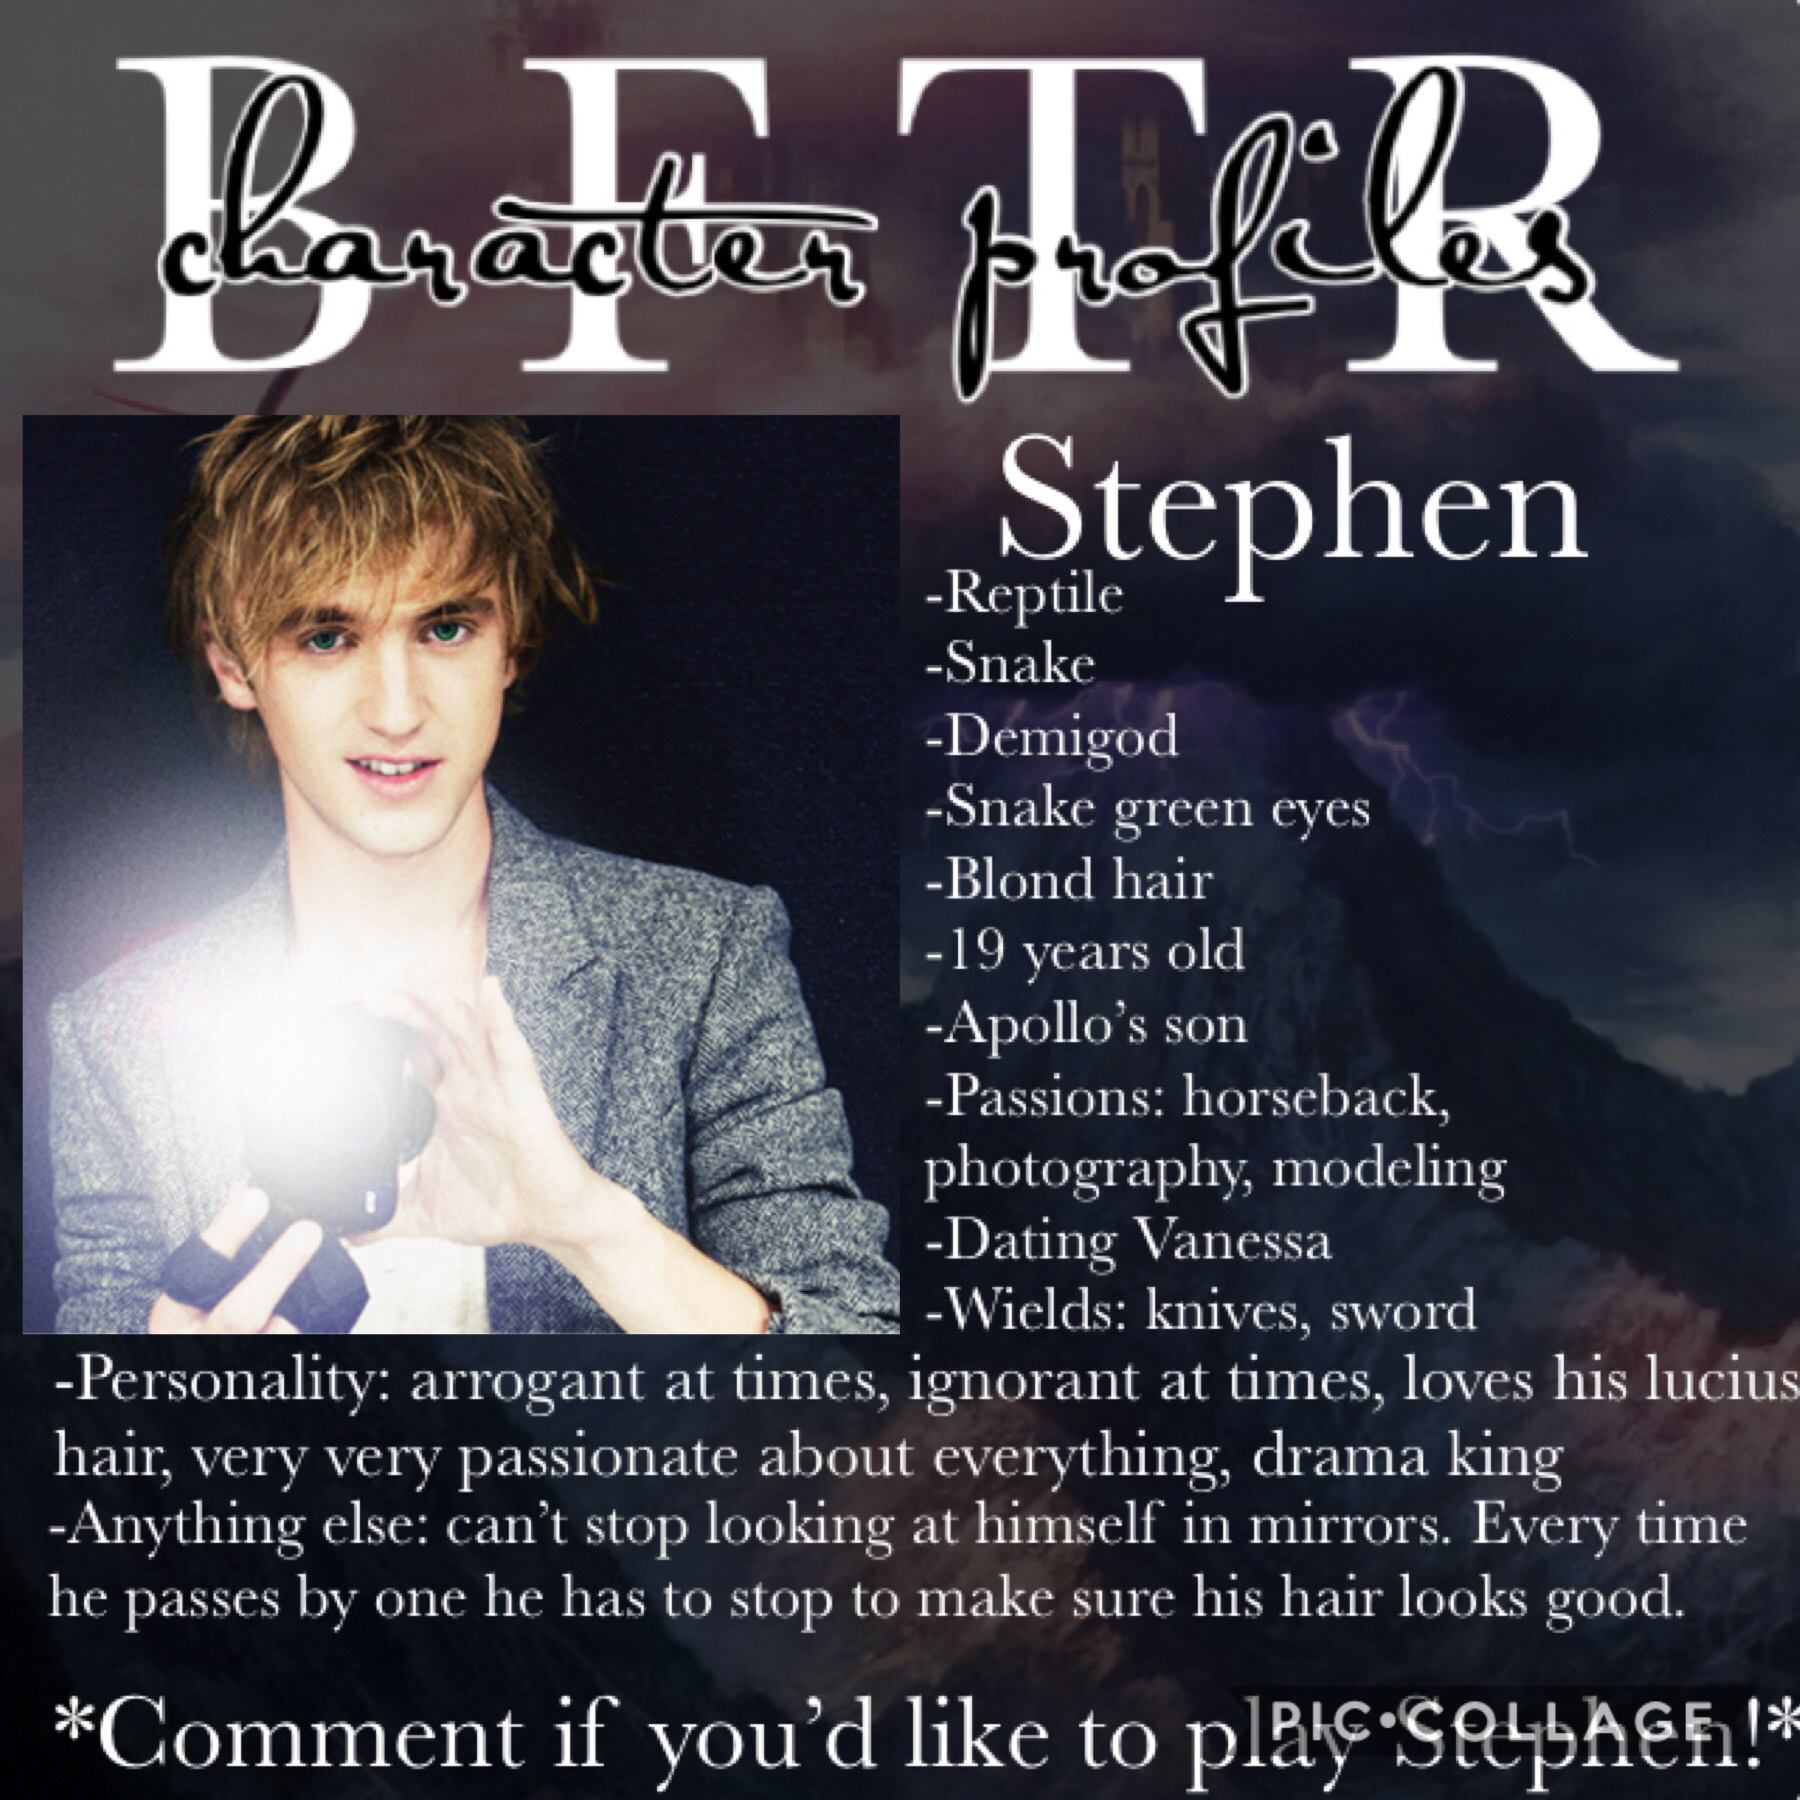 🖤COMMENT TO PLAY STEPHEN🖤